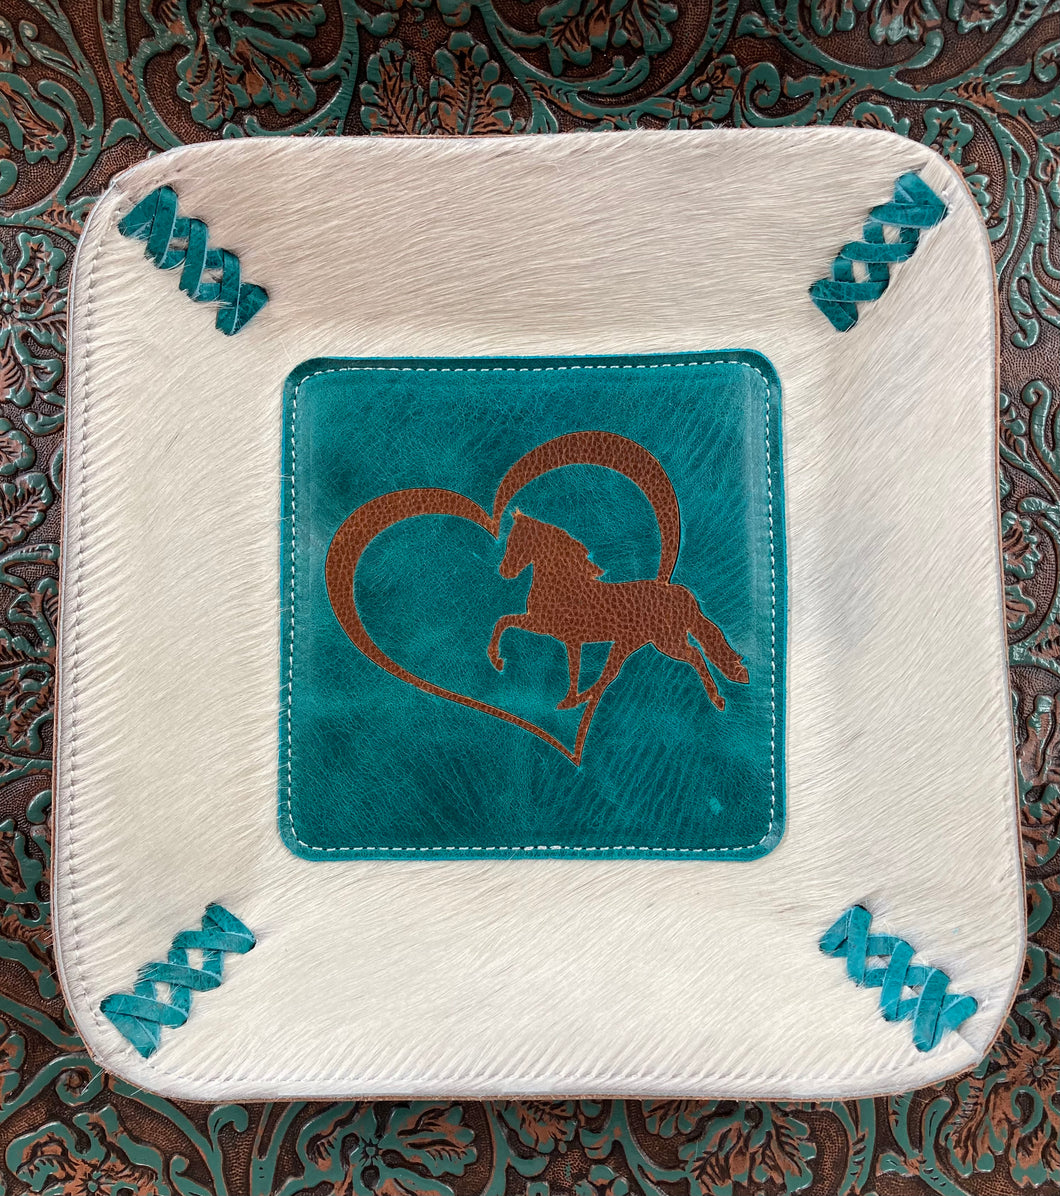 Valet Tray - Brown Horse Inlayed on Turquoise on White Hair-on-Hide